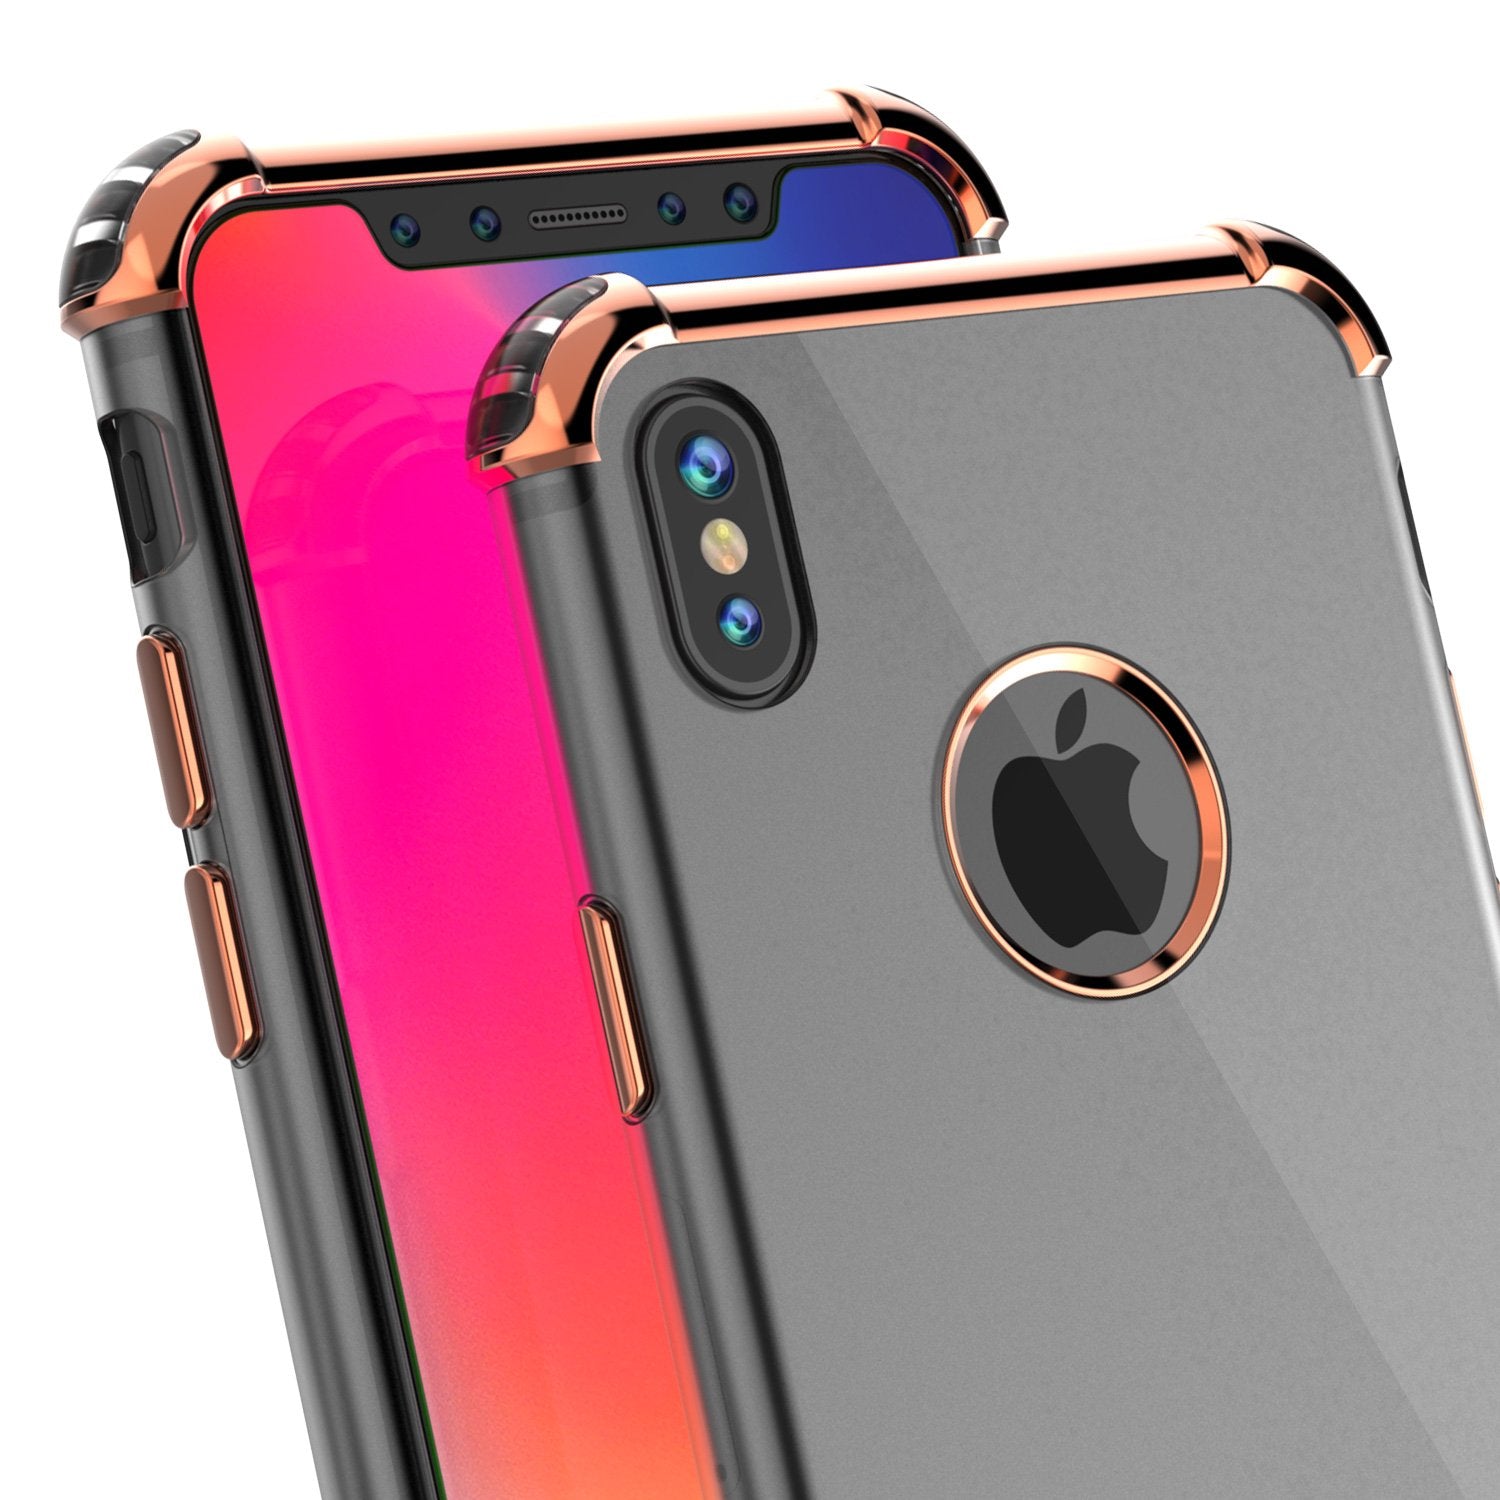 iPhone X Case, Punkcase [BLAZE SERIES] Protective Cover W/ PunkShield Screen Protector [Shockproof] [Slim Fit] for Apple iPhone 10 [Rosegold]